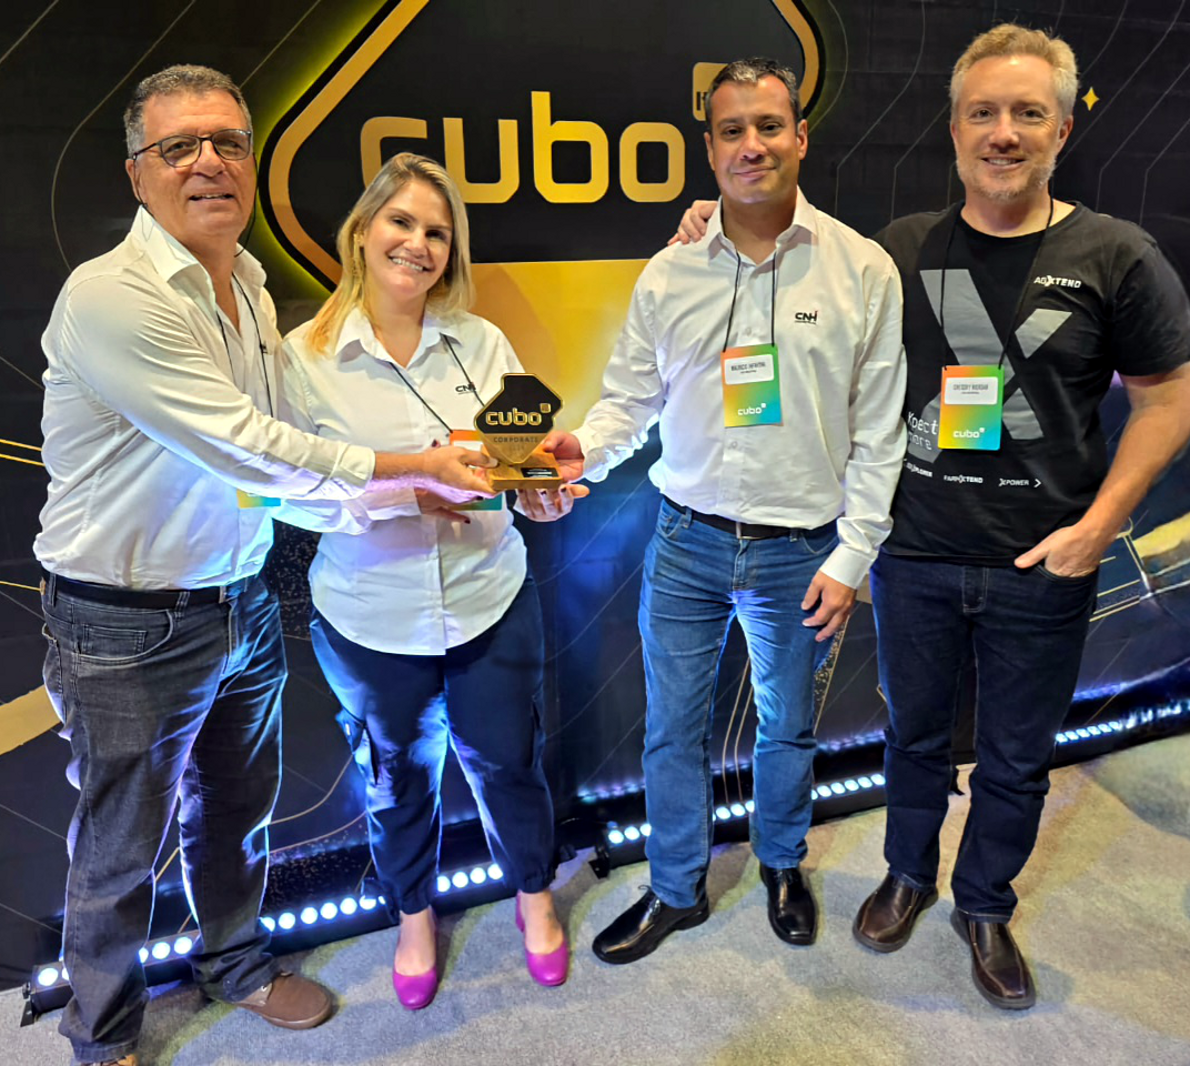 Four people holding the Golden Cube award